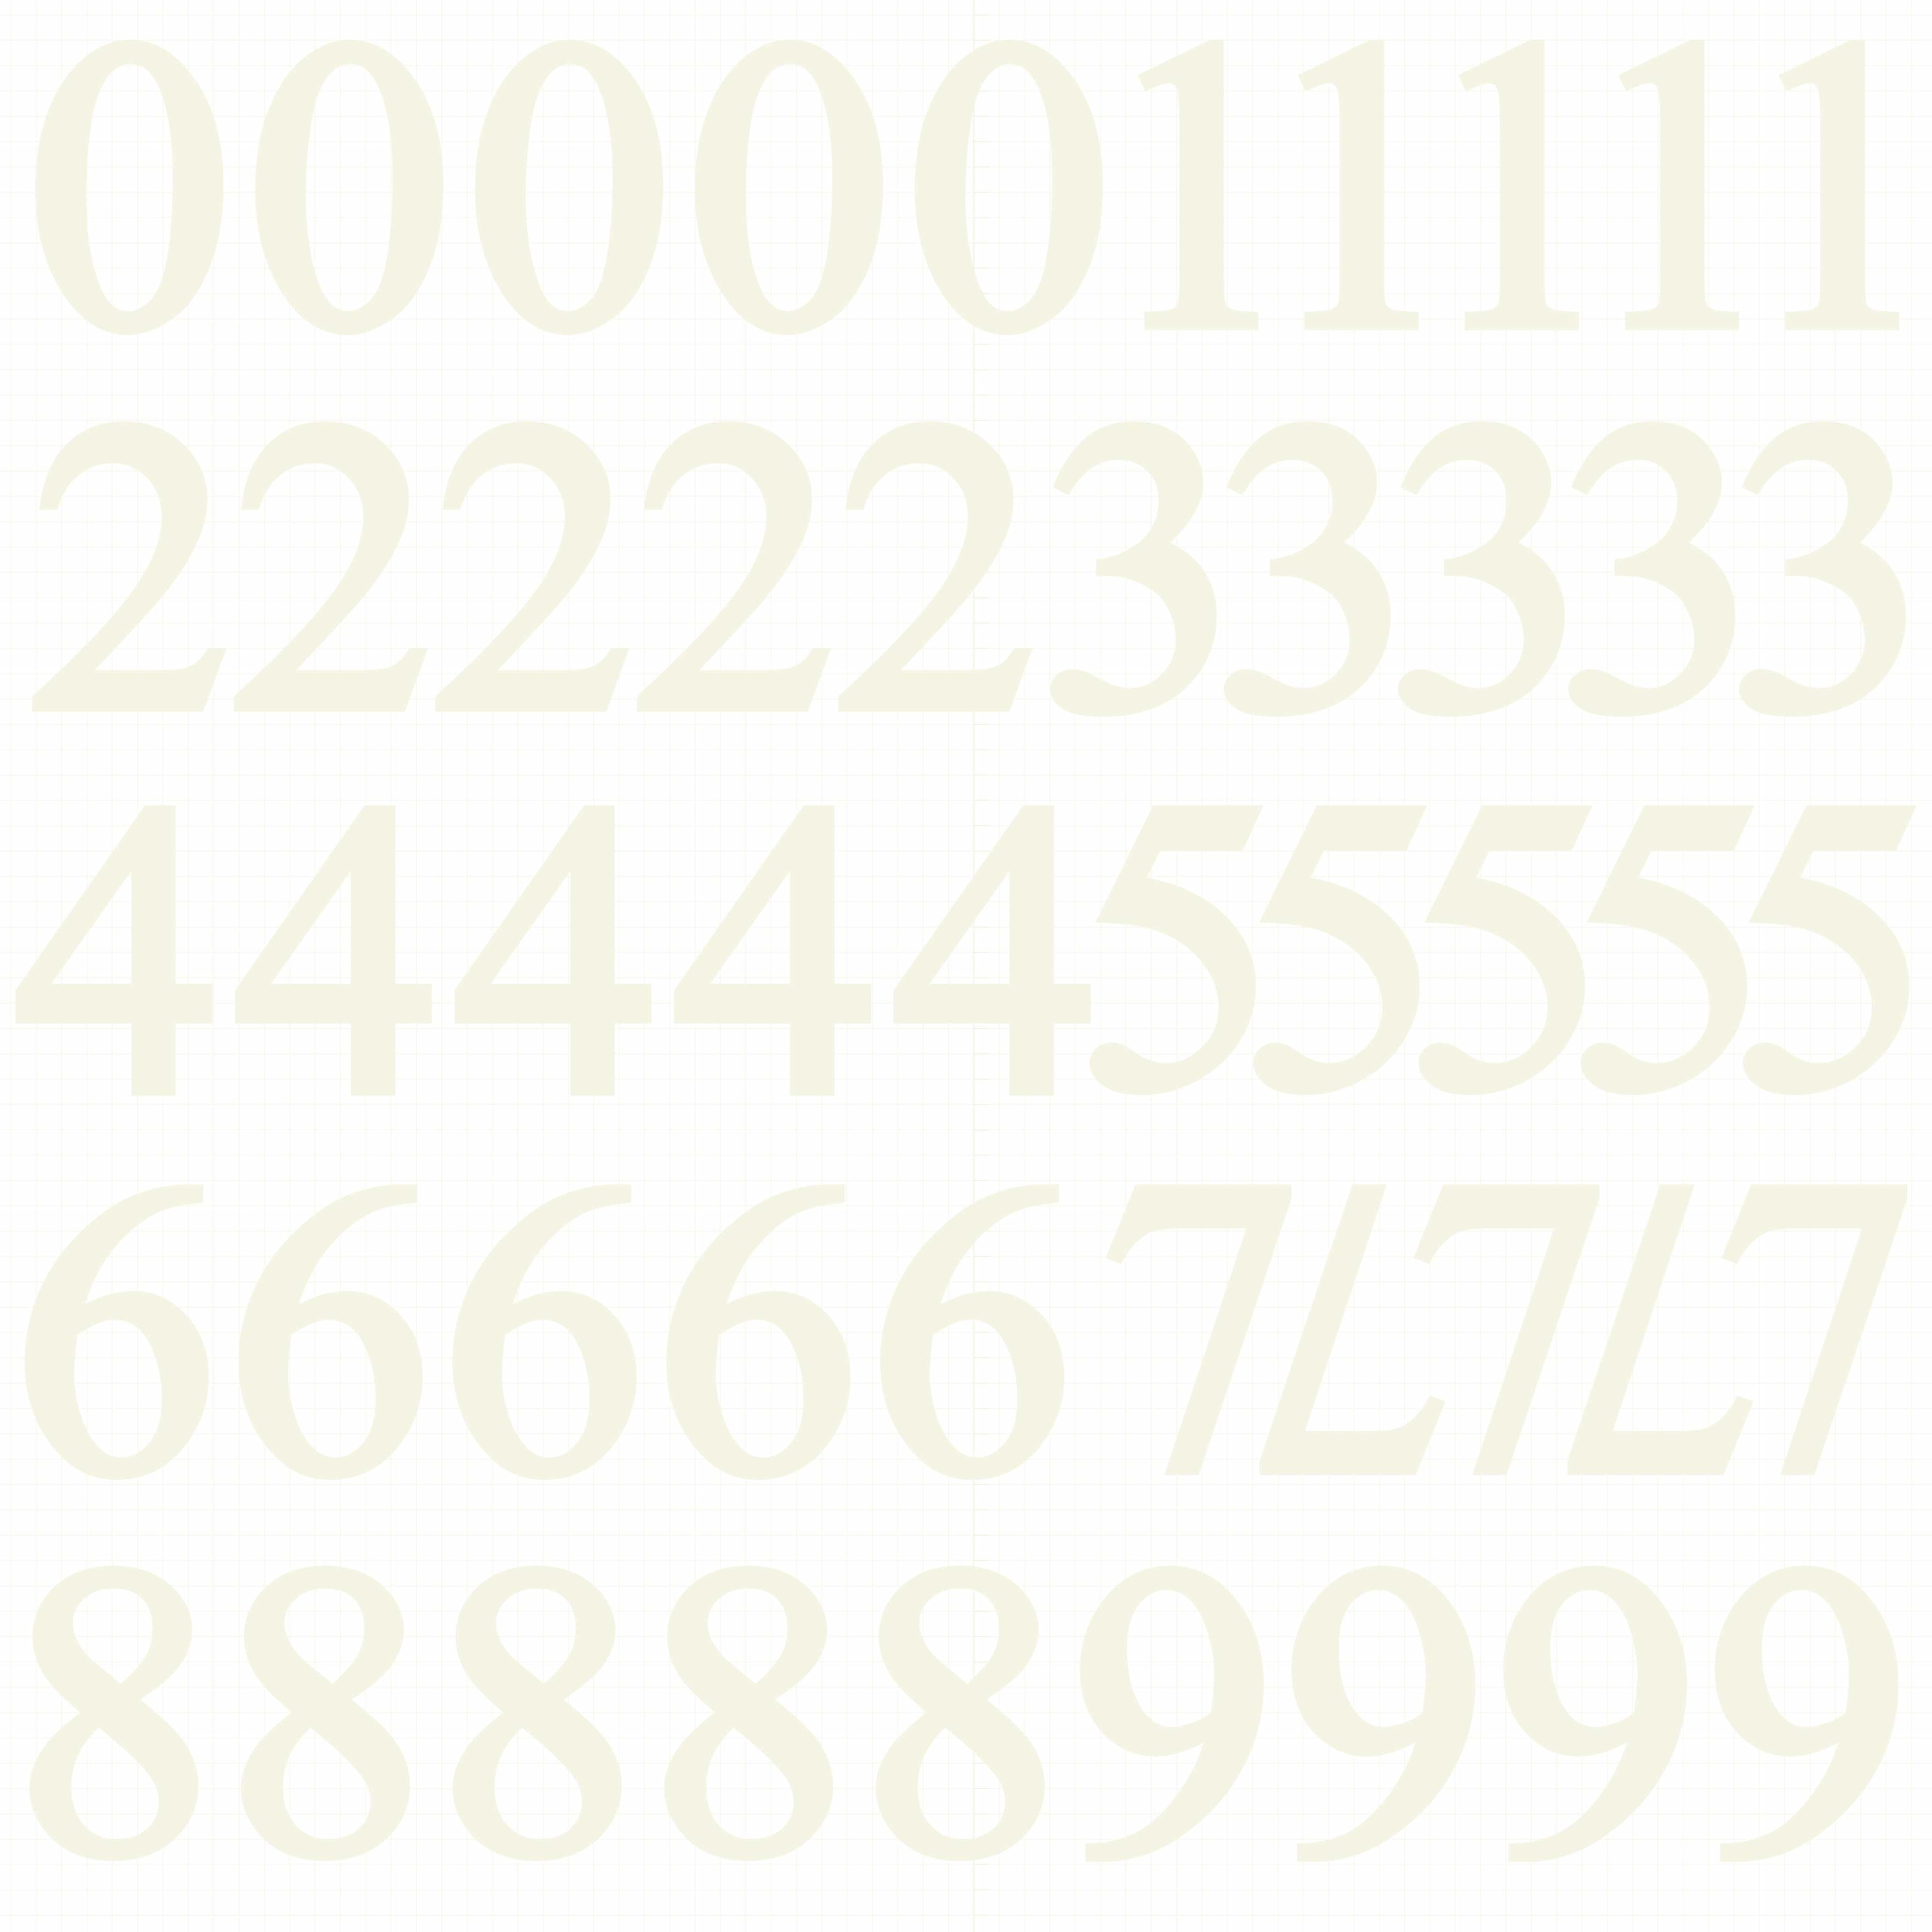 Number Stickers - Ivory